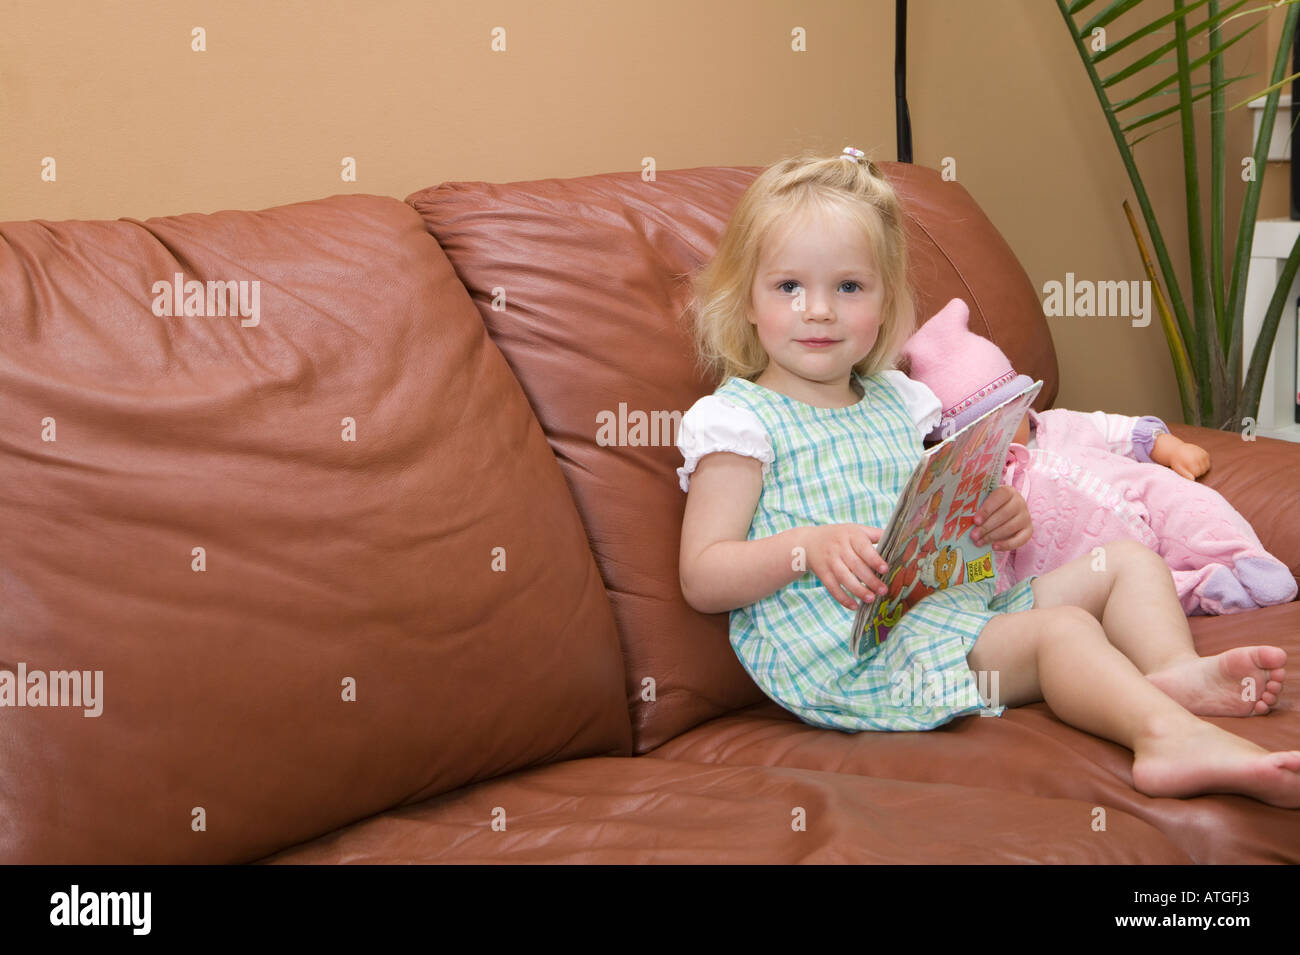 Young Girl Sitting on a Sofa Stock Photo